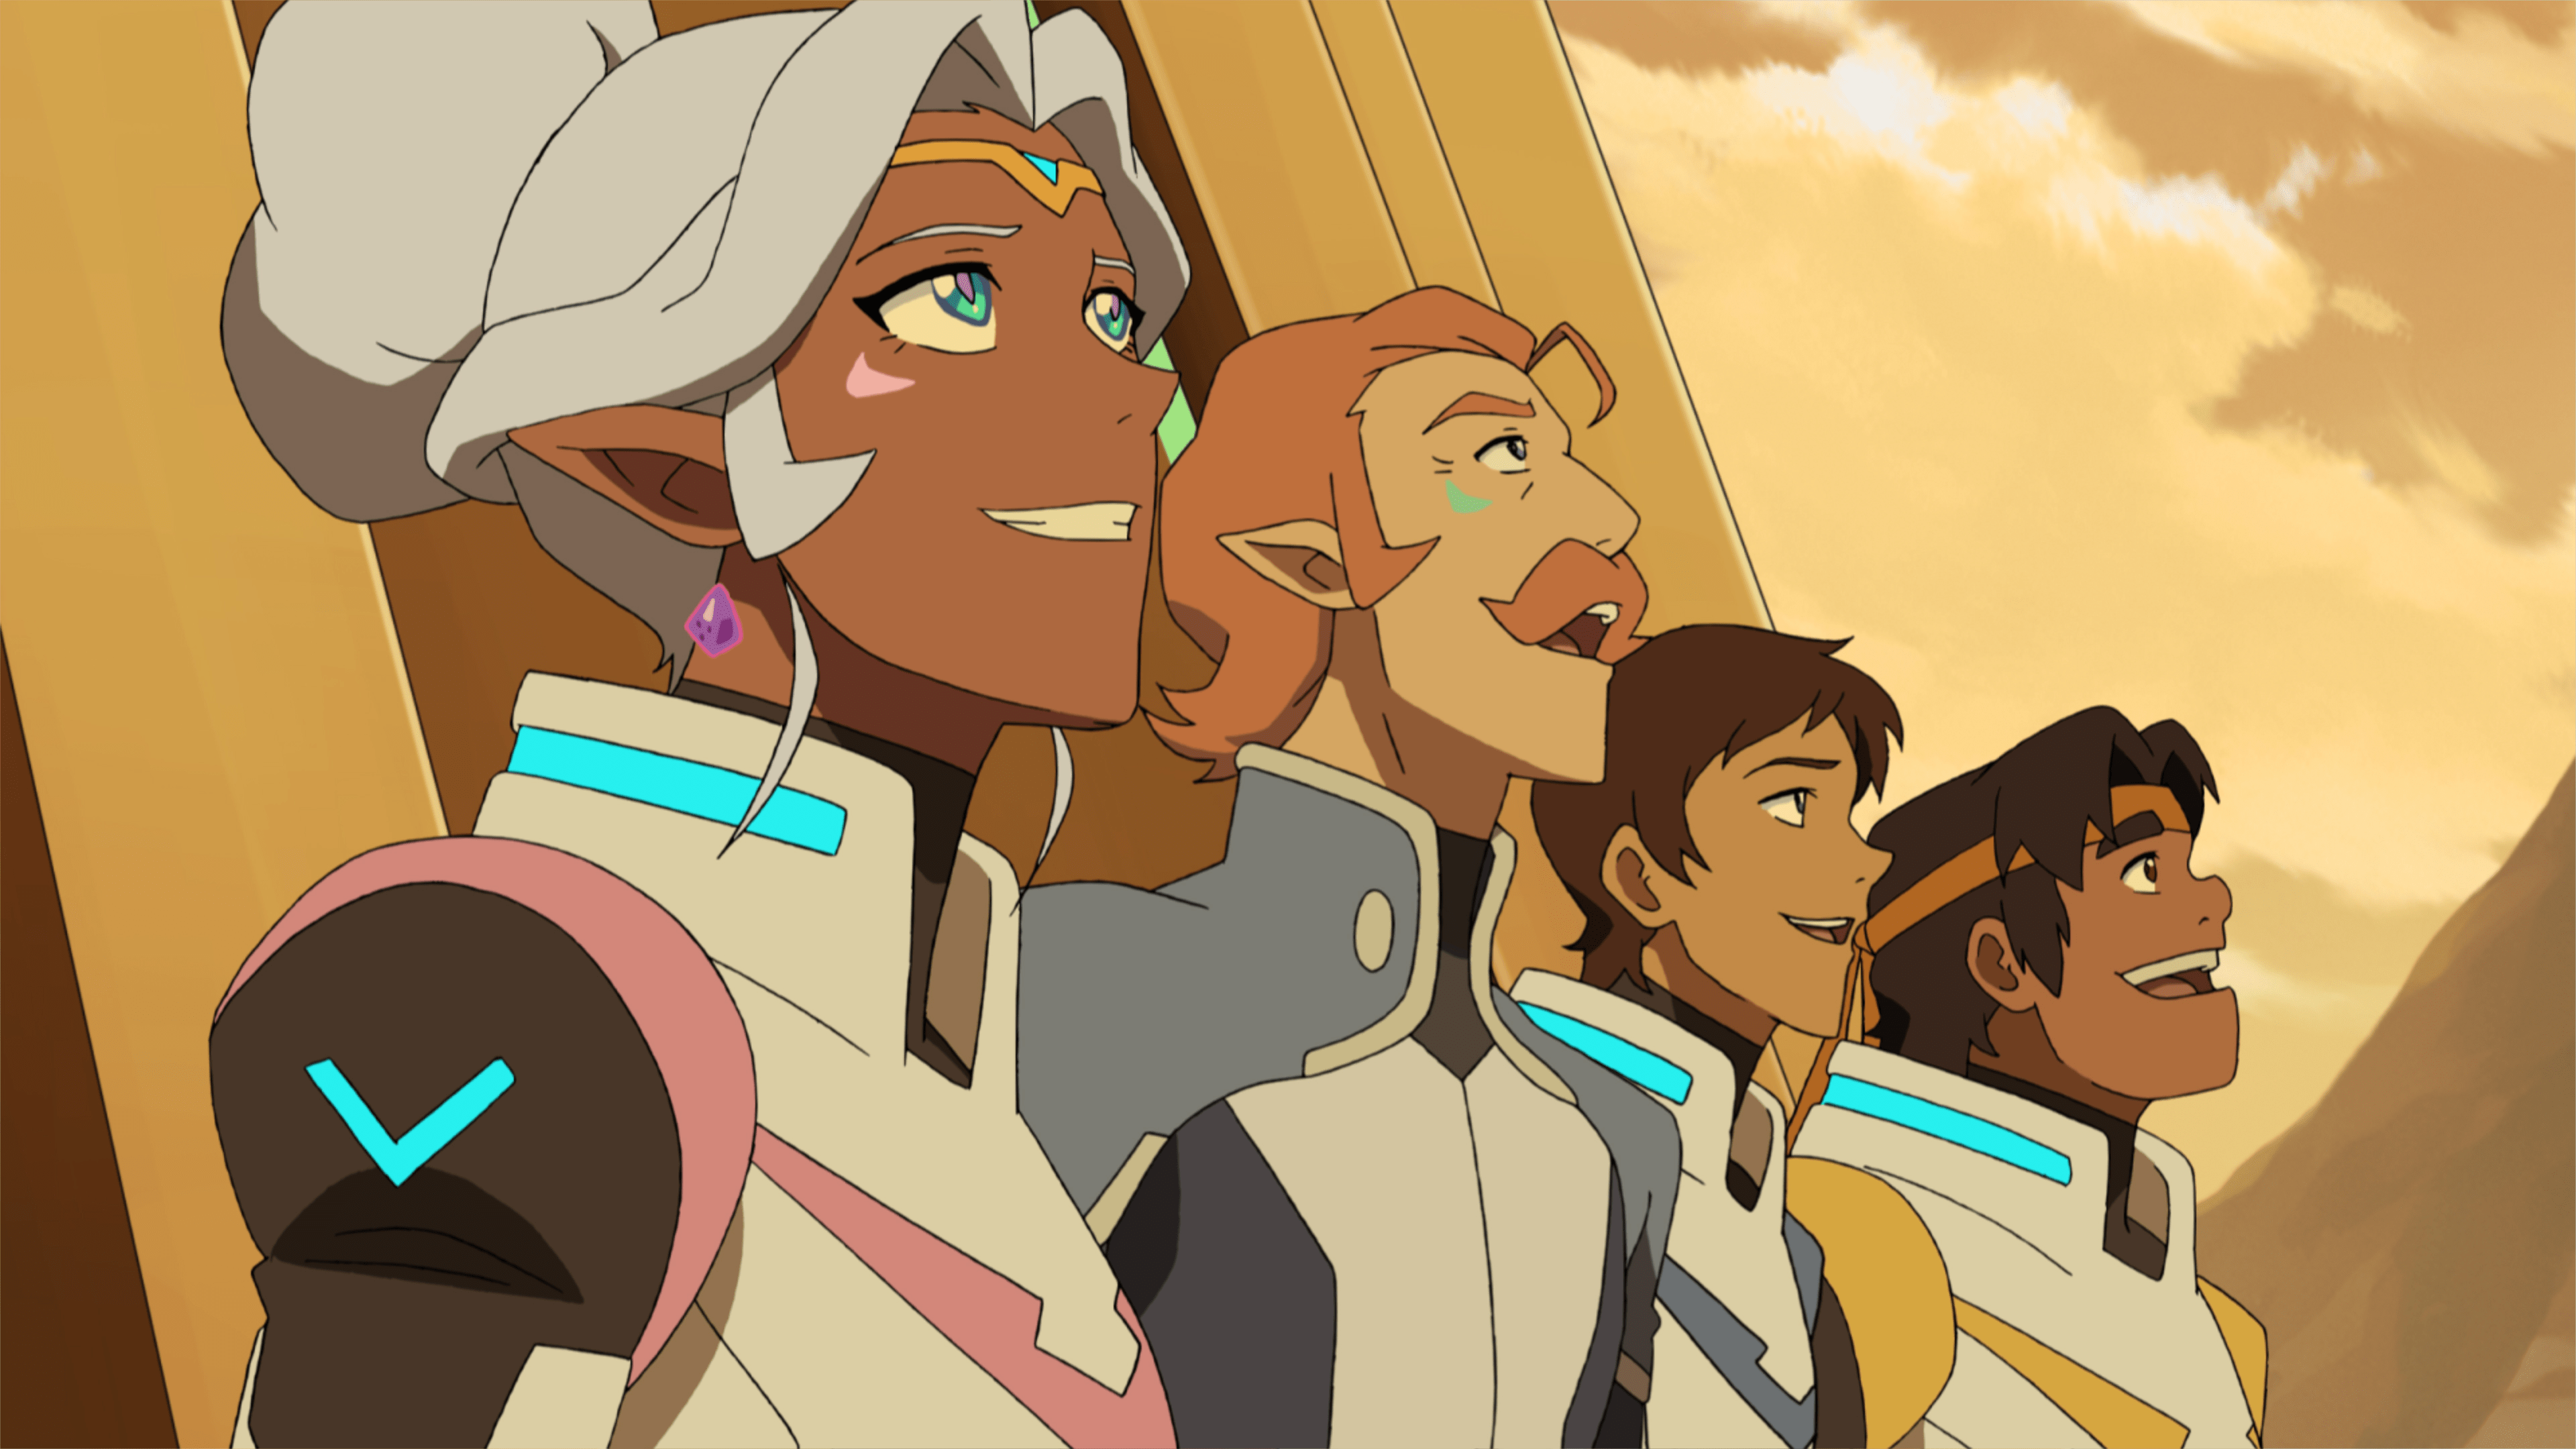 Even At Its Most Frustrating, Voltron: Legendary Defender Can Still Deliver A Great Story 